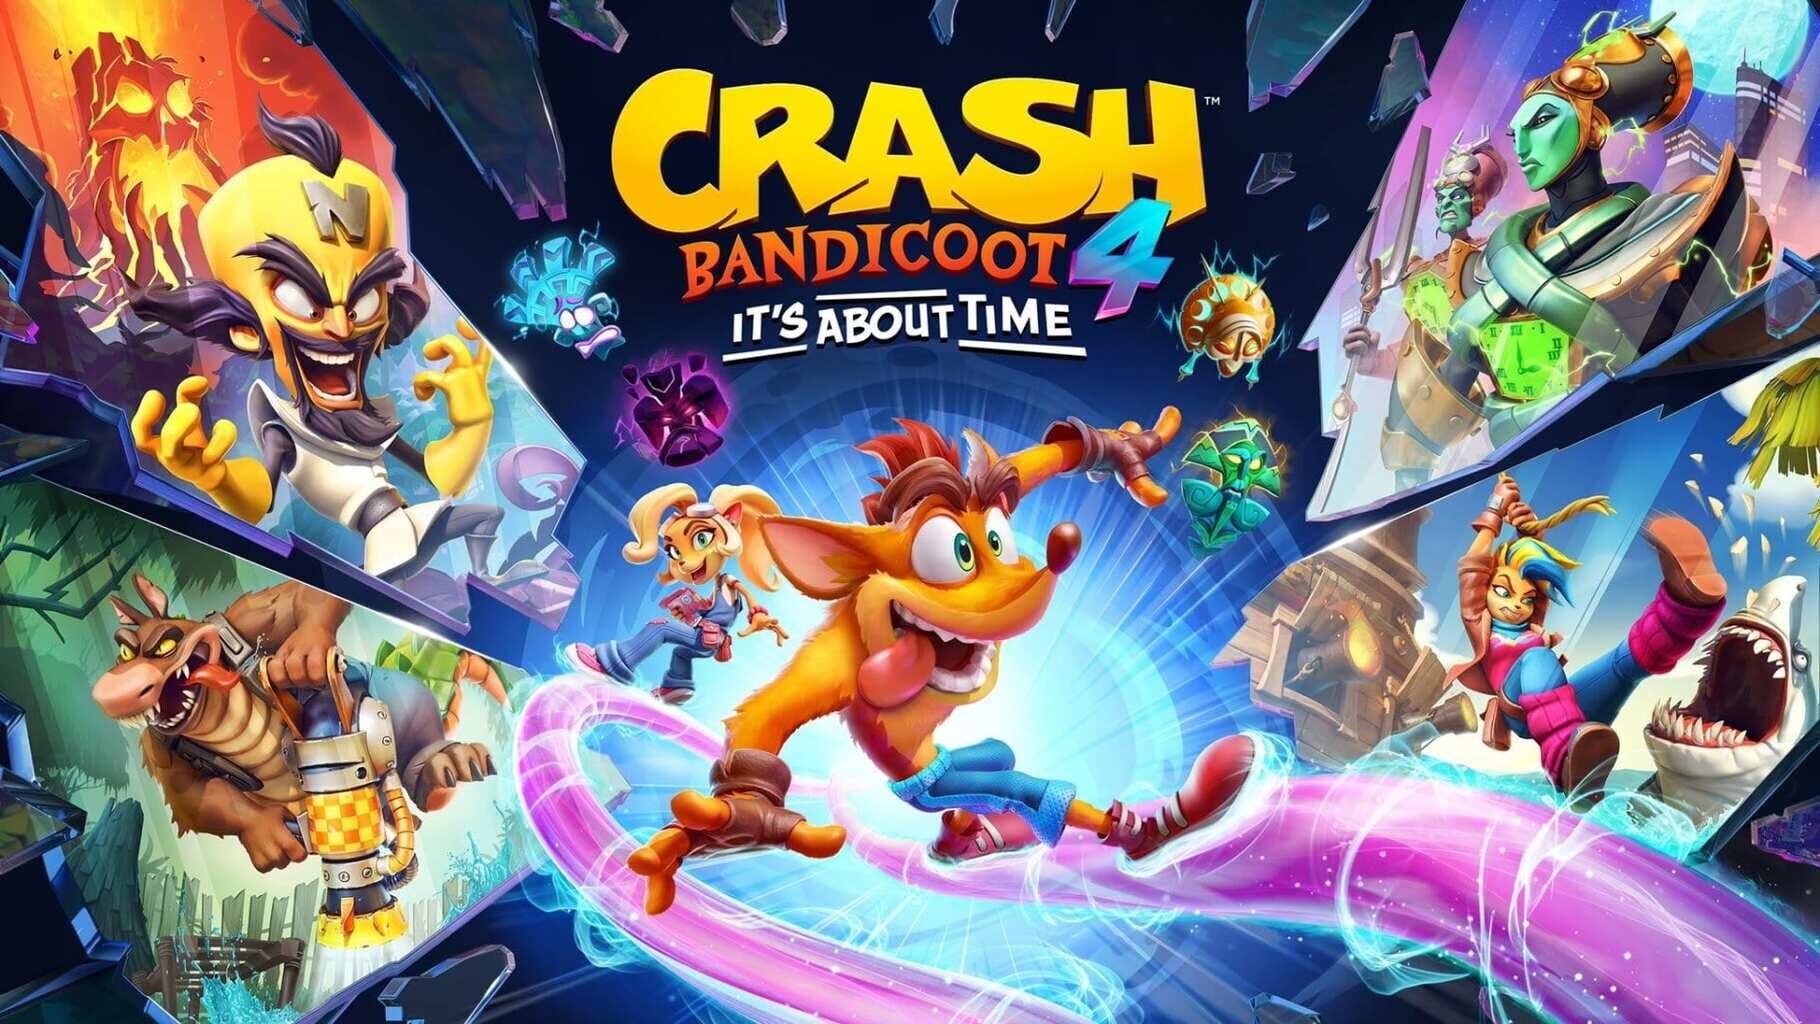 Artwork for Crash Bandicoot 4: It's About Time